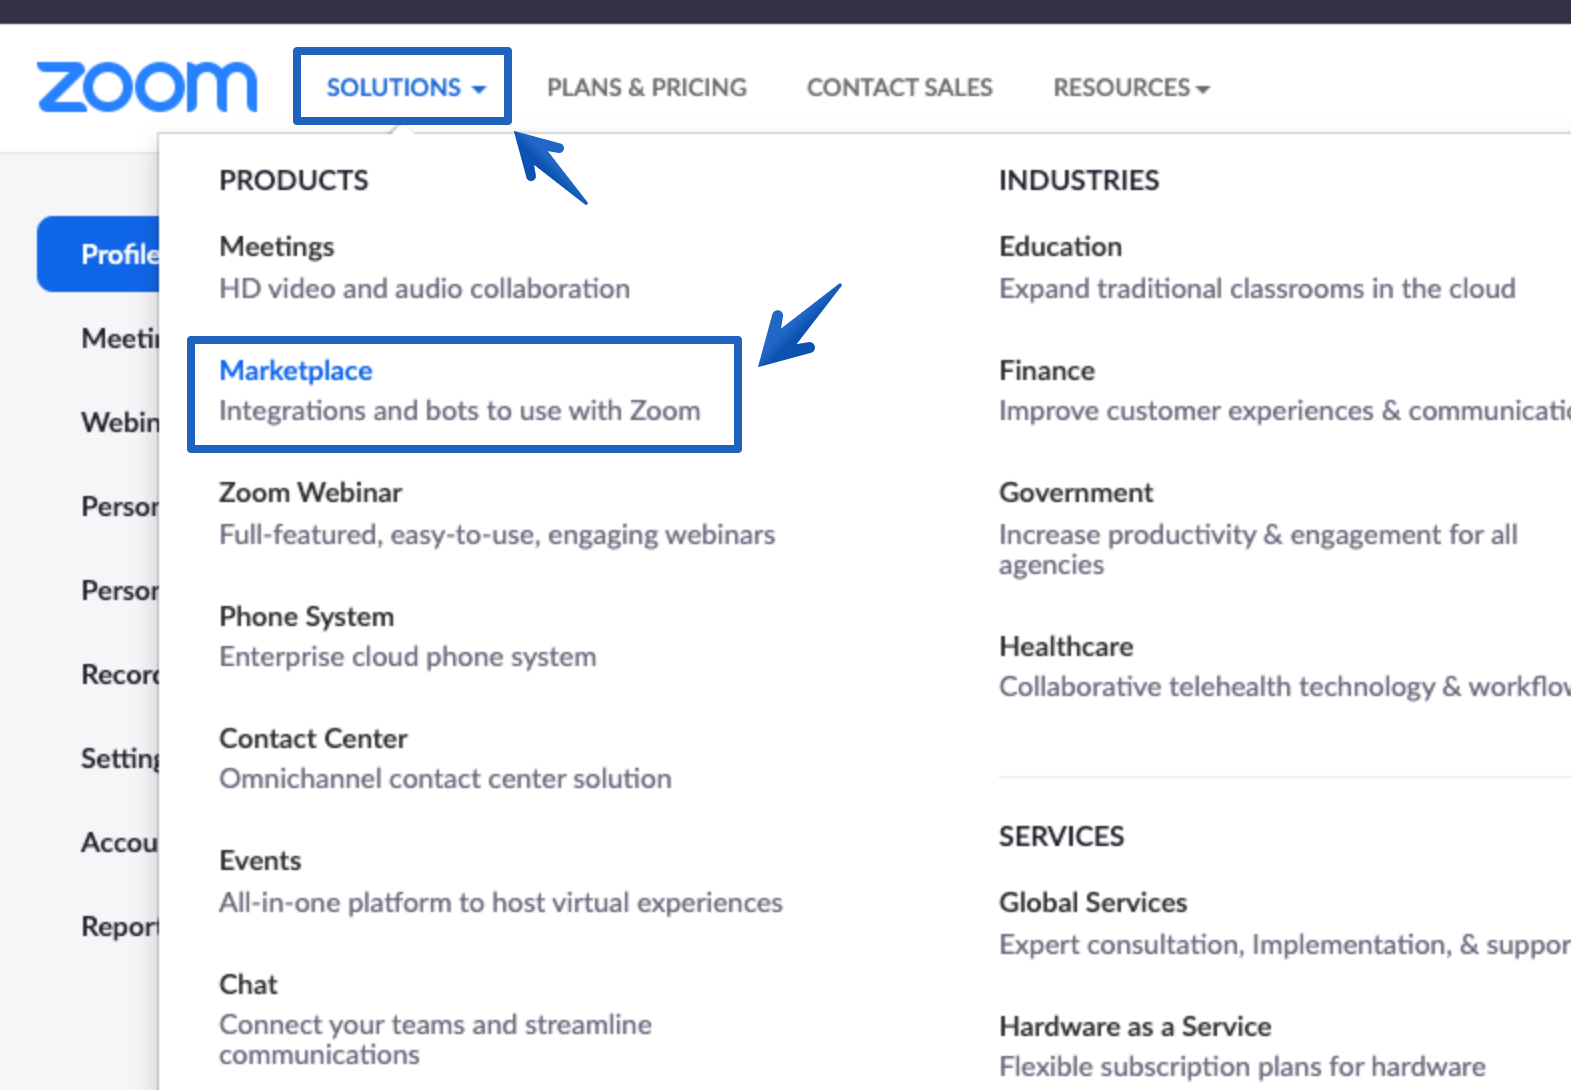 Selecting Marketplace in the Solutions drop down menu